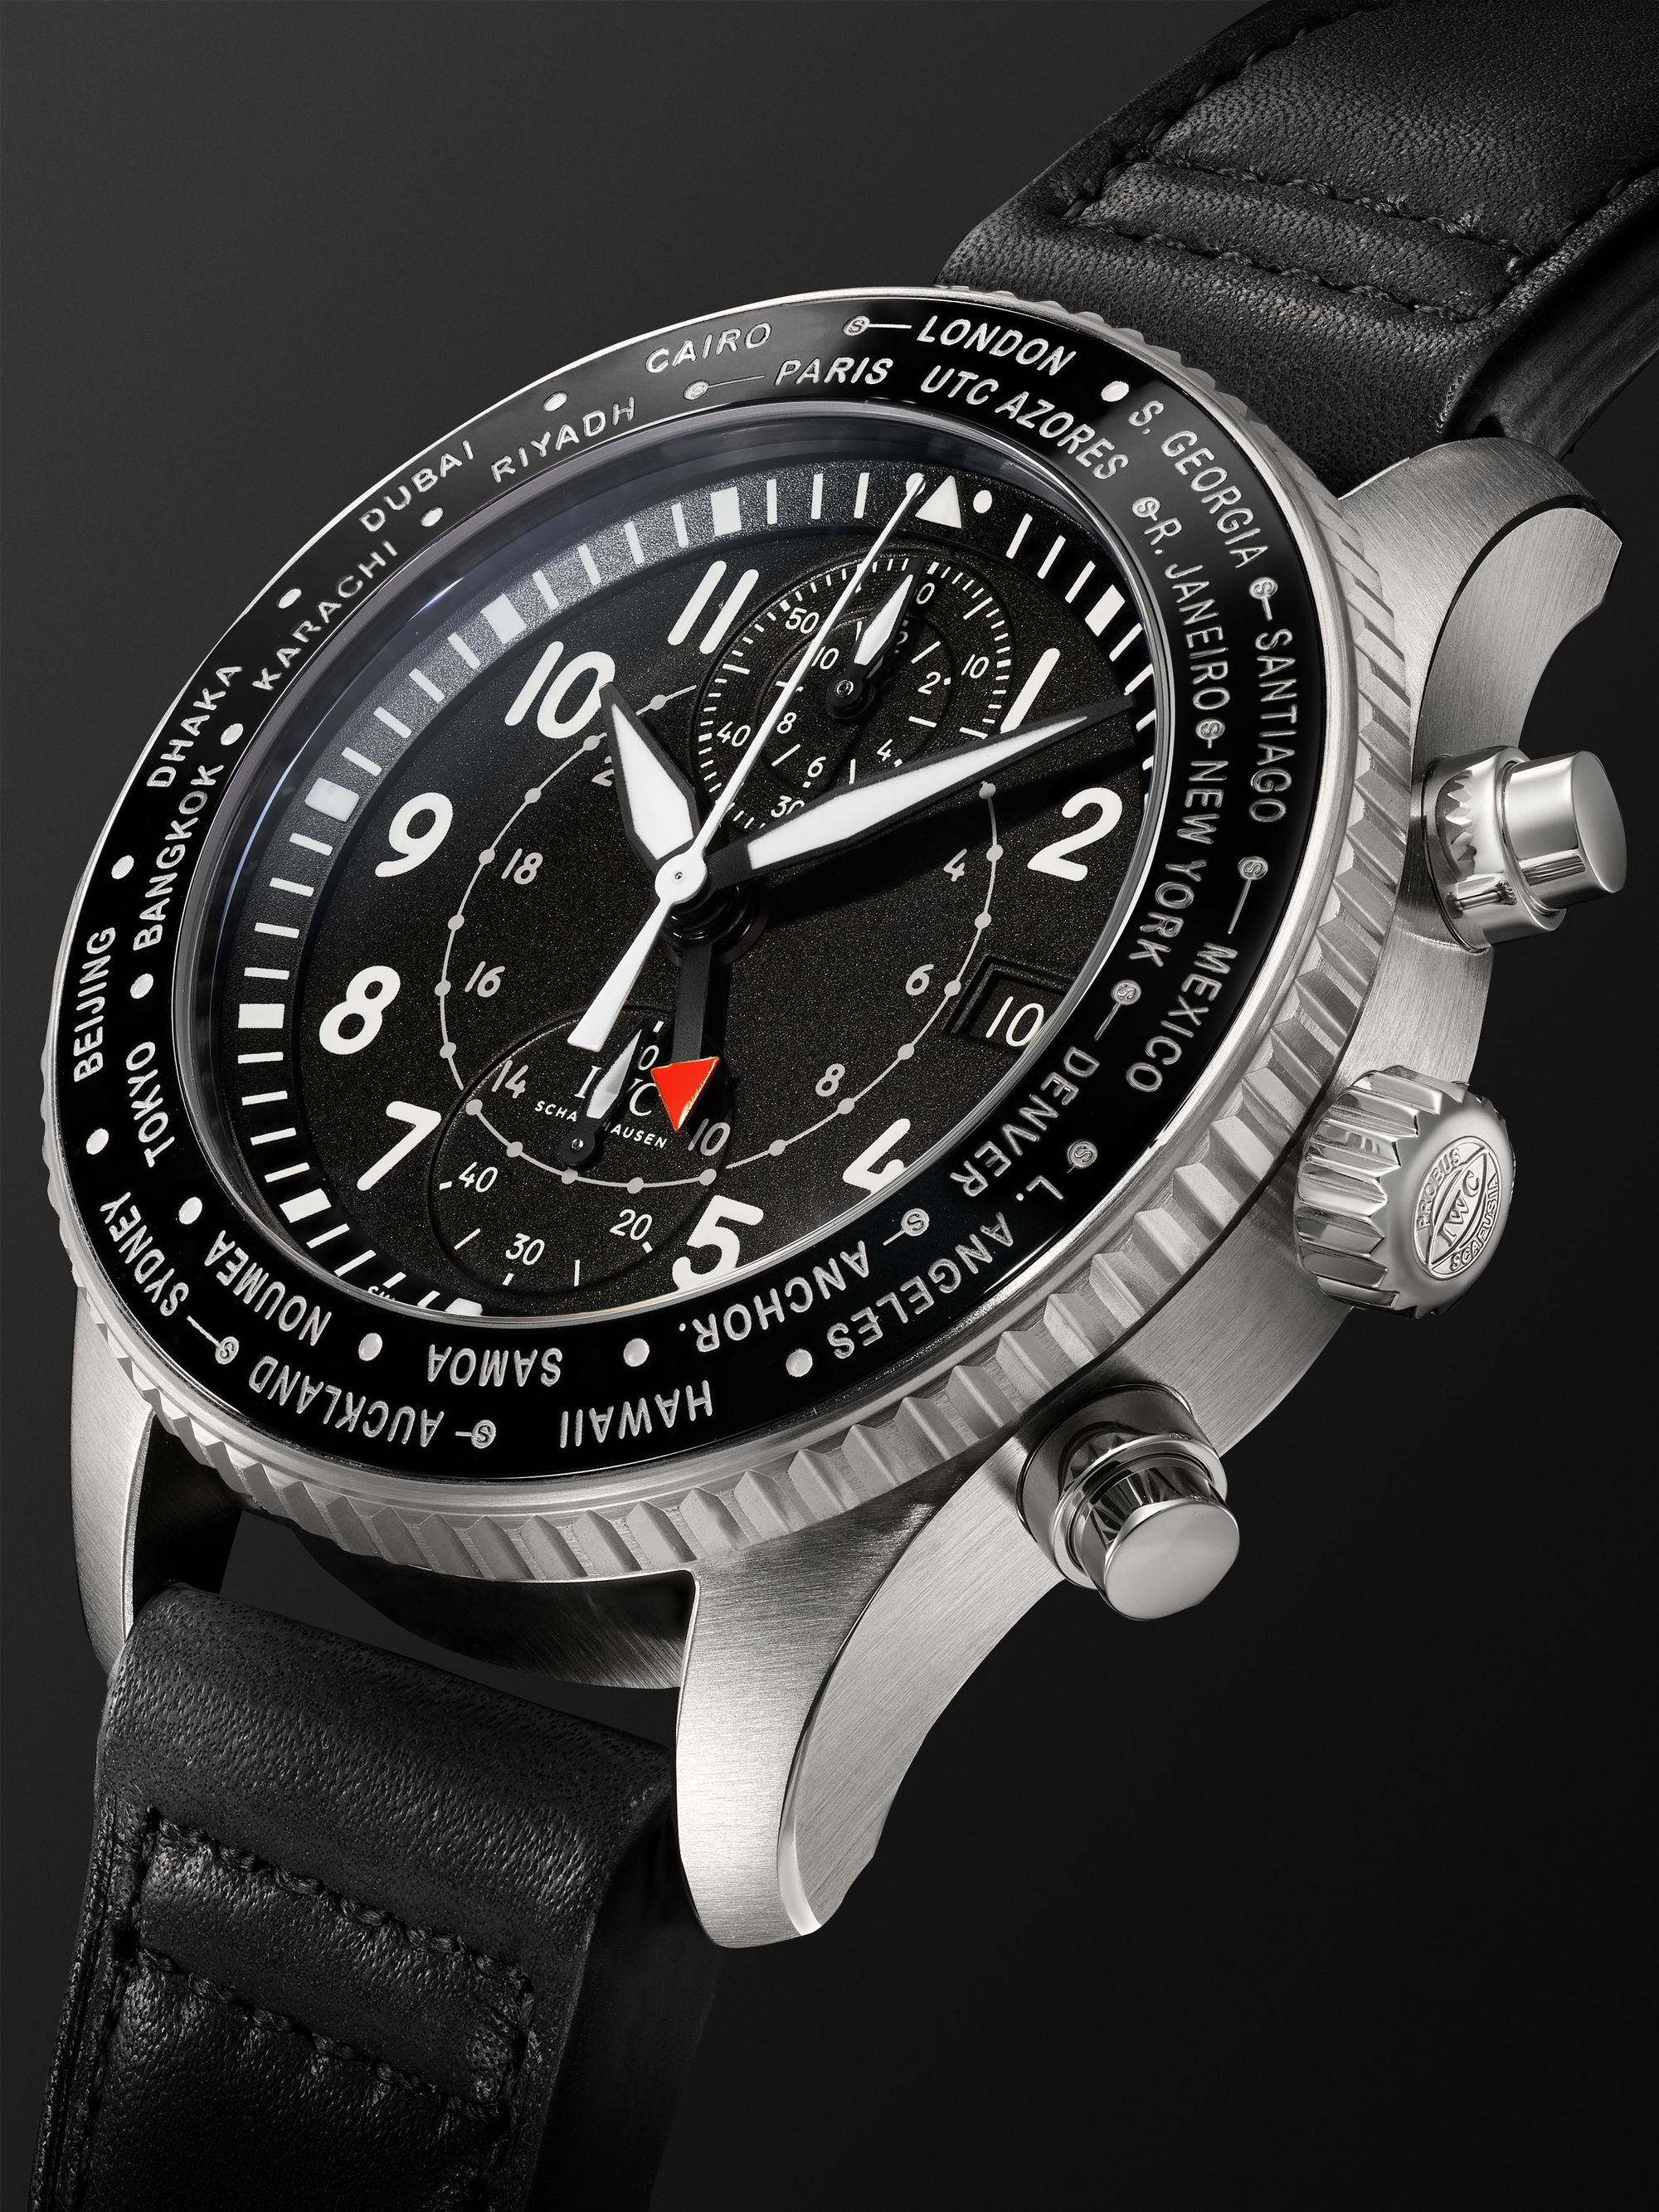 IWC SCHAFFHAUSEN Pilot's Timezoner Automatic Chronograph 46mm Stainless Steel and Leather Watch, Ref. No. IW395001